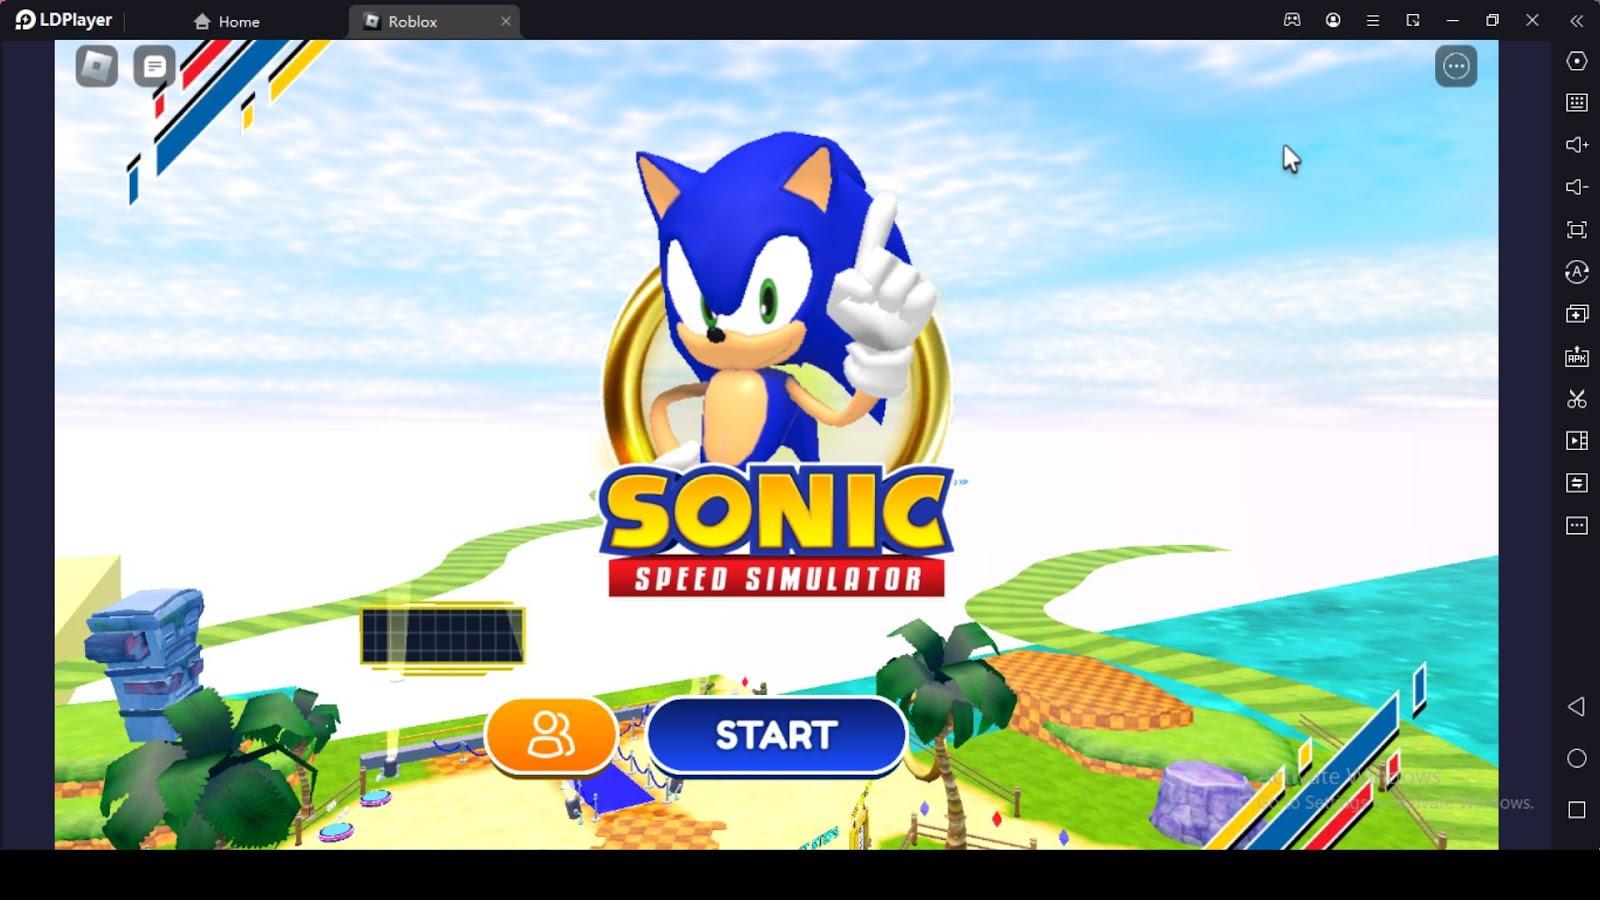 Where To Find Sonic In Sonic Speed Simulator - Sonic Location